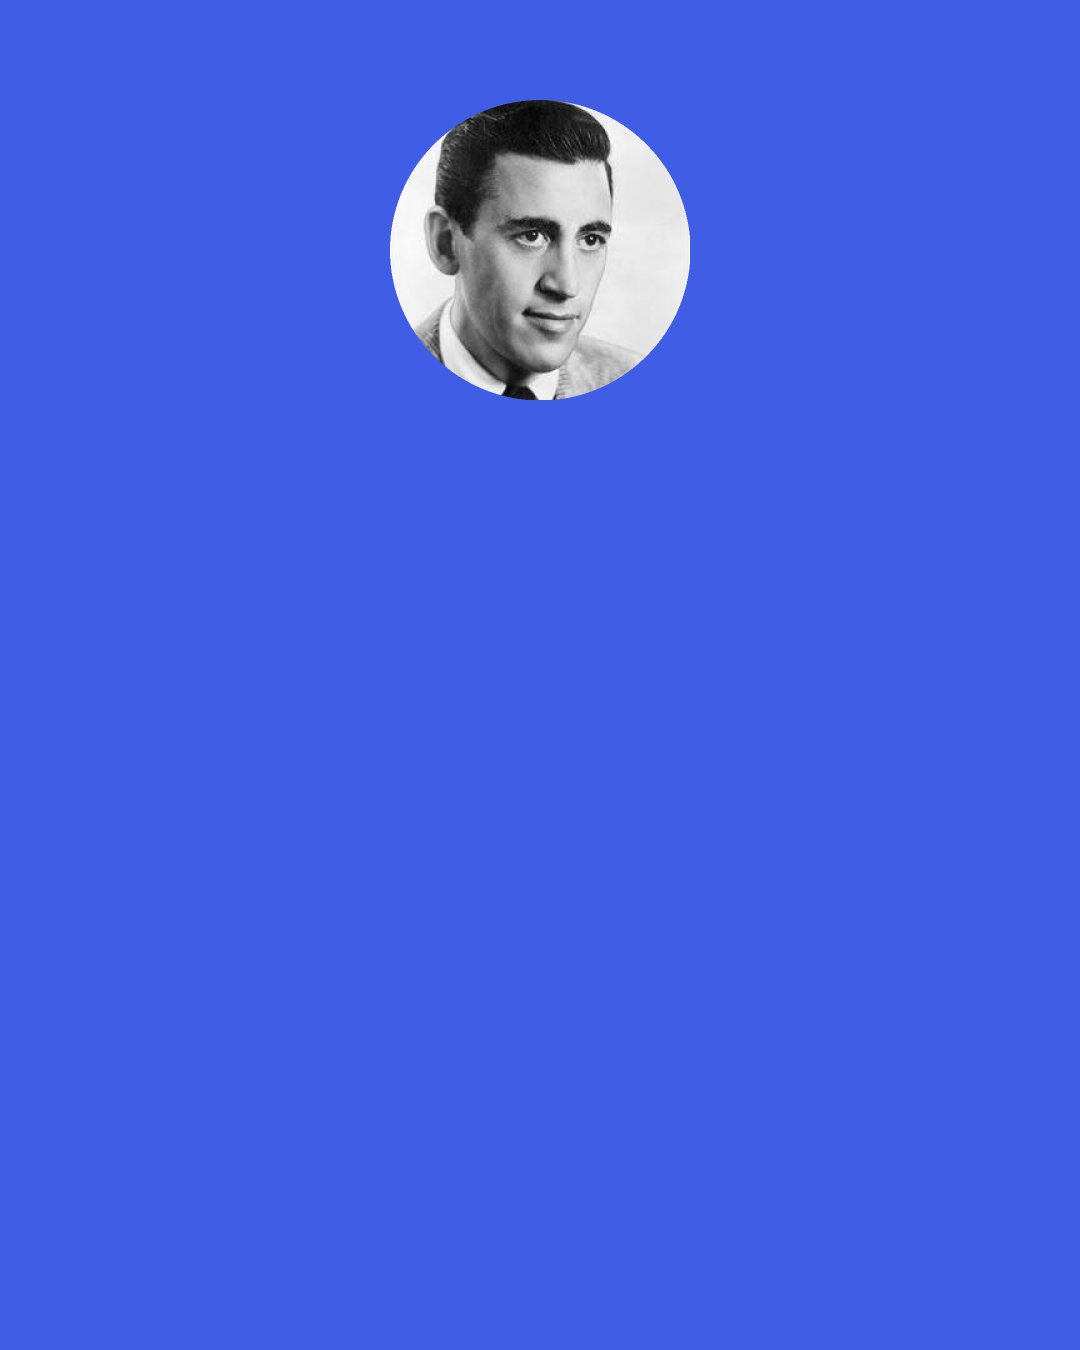 J. D. Salinger: Women kill me. They really do. I don't mean I'm oversexed or anything like that—although I am quite sexy. I just like them, I mean. They're always leaving their goddam bags out in the middle of the aisle.